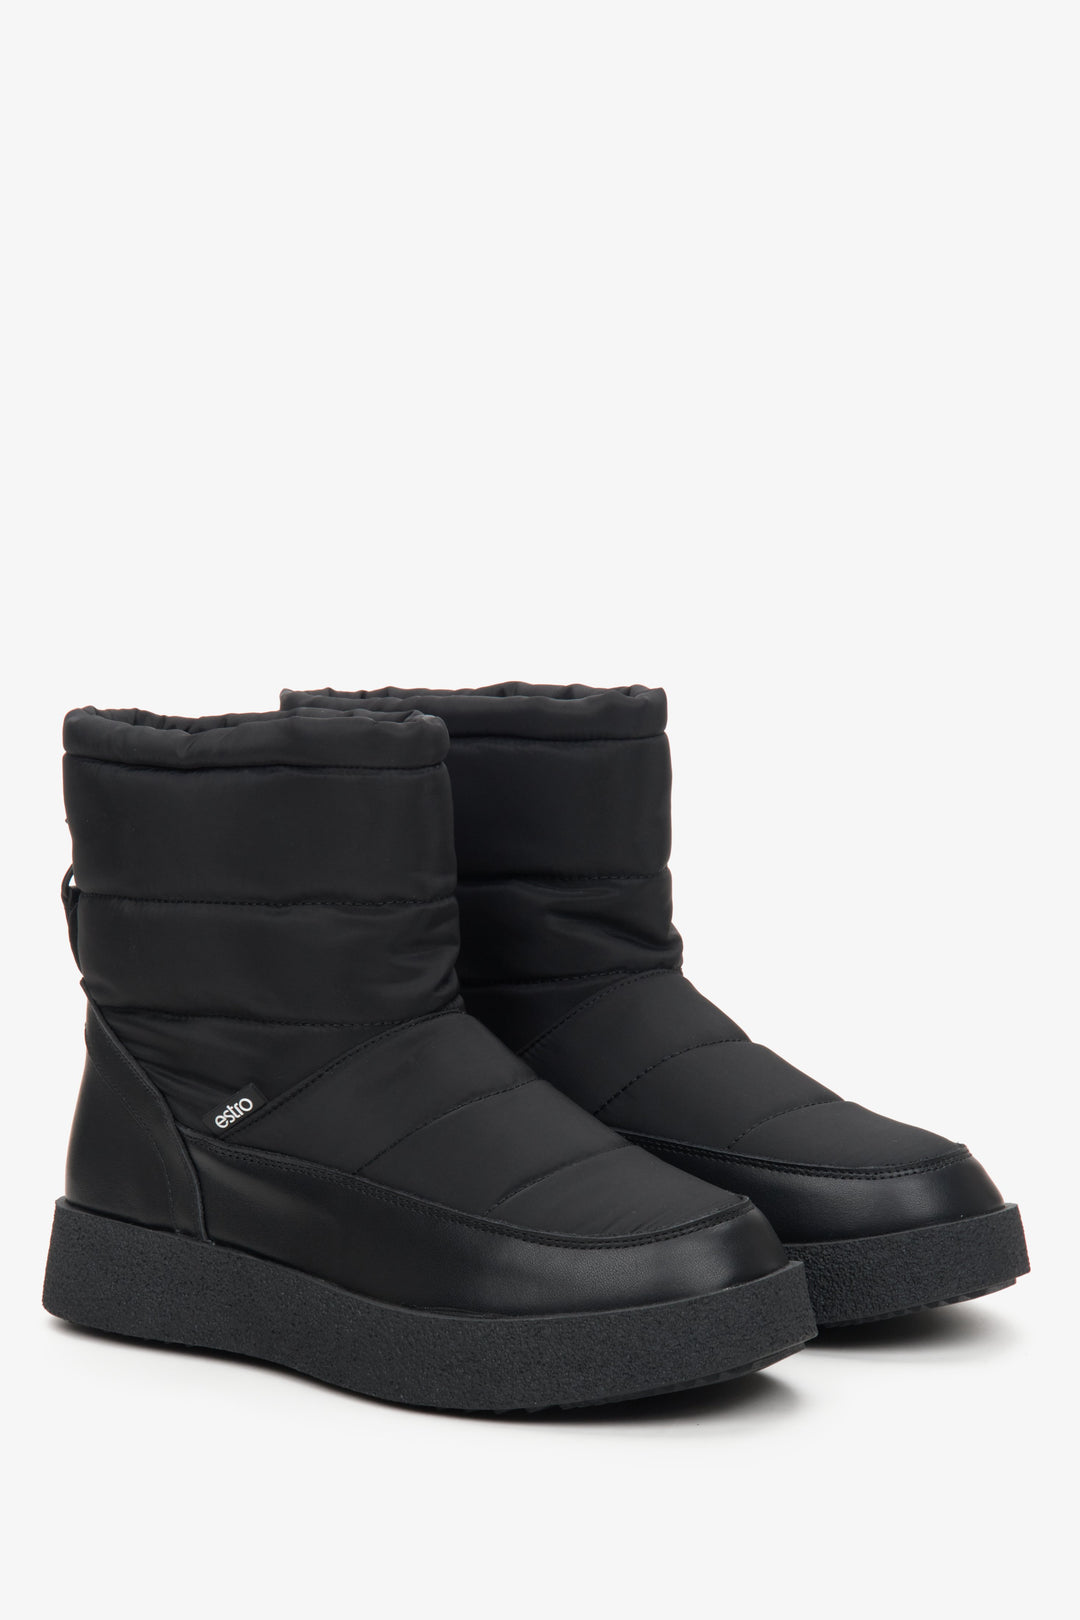 Women's black leather snow boots with fur lining by Estro.